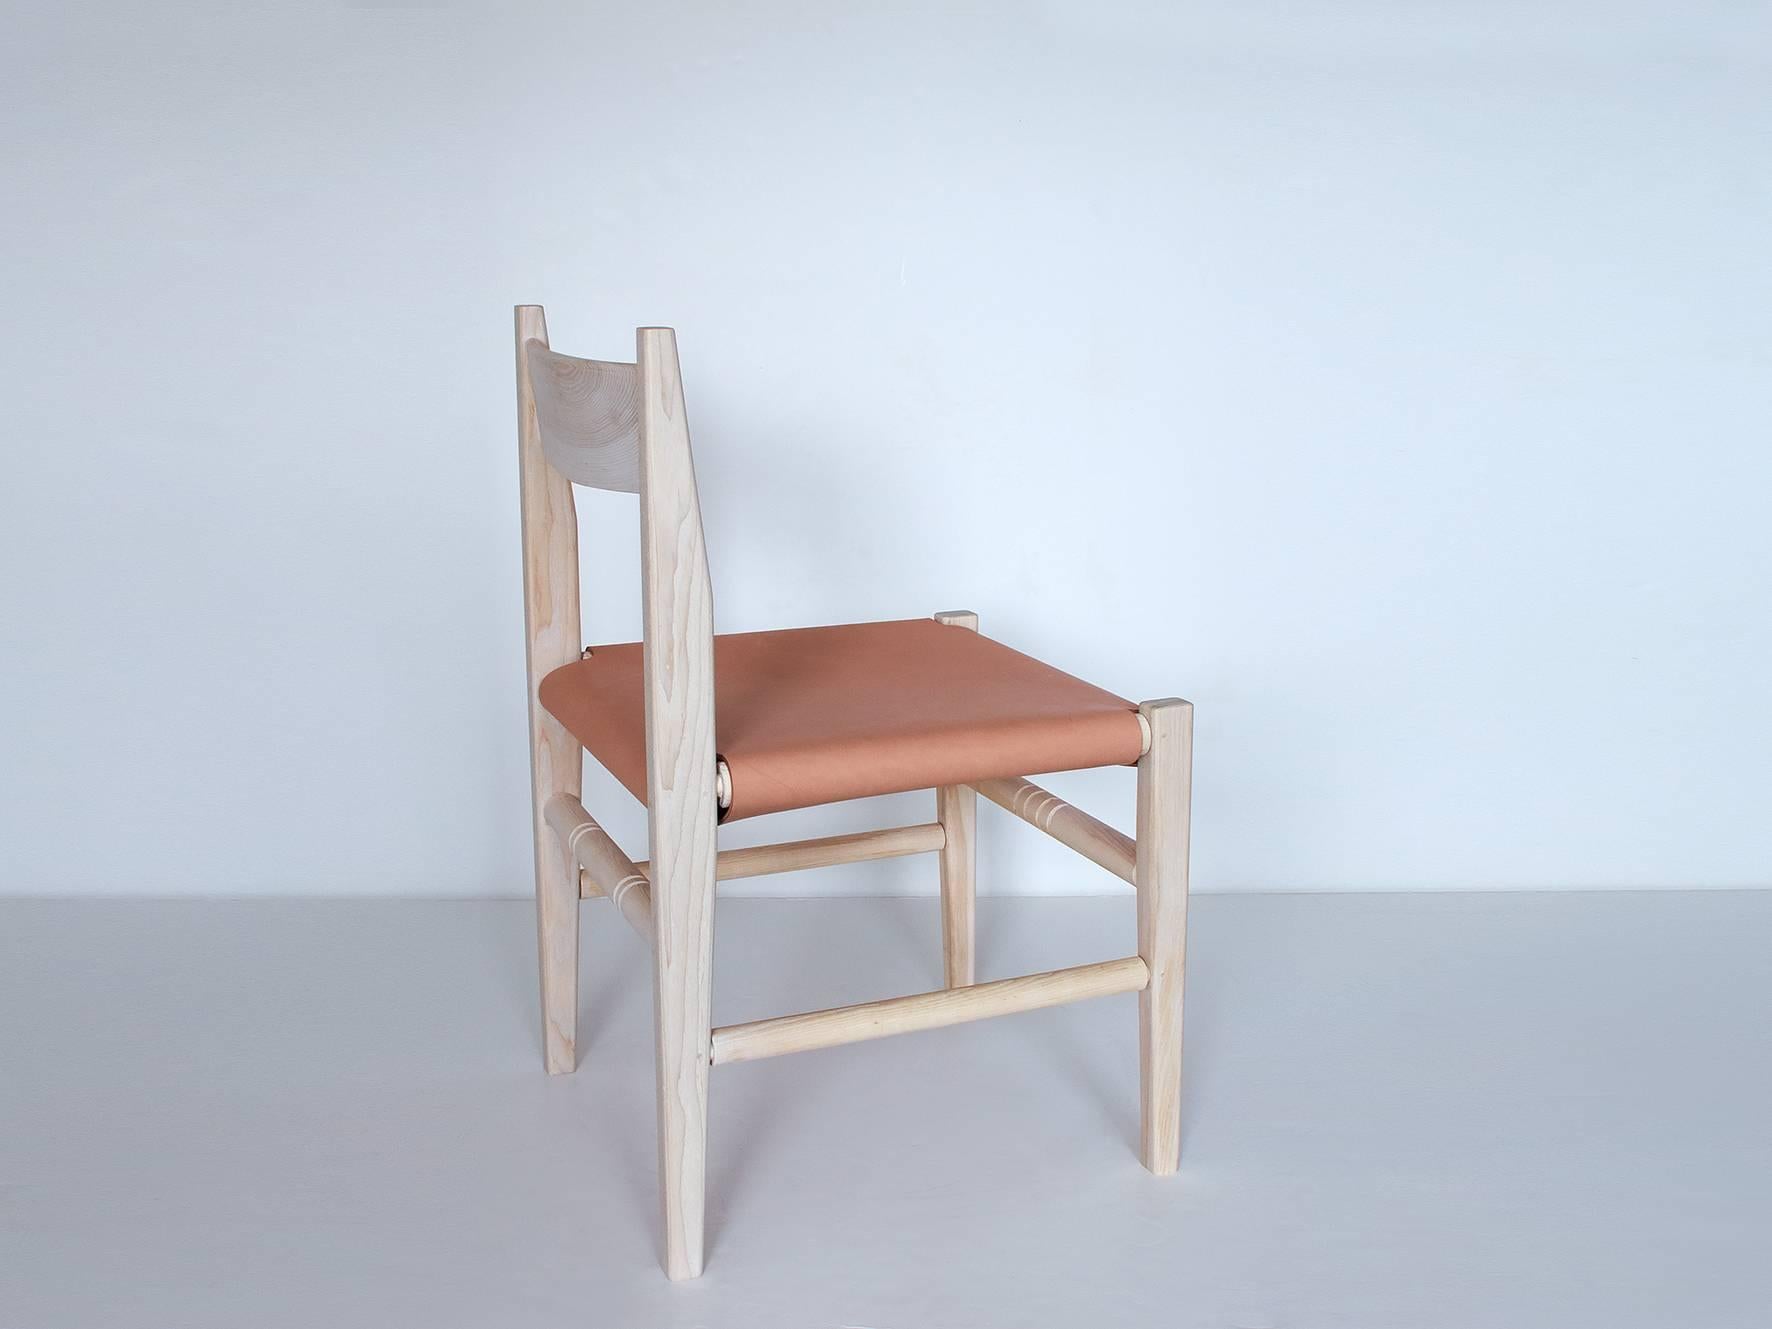 The silo dining chair is available with a carved wooden seat, a woven hickory bark seat, or a leather sling seat. Each chair features a unique pattern on the turned rungs - no two chairs are alike.

Available in black walnut (natural or oxidized),